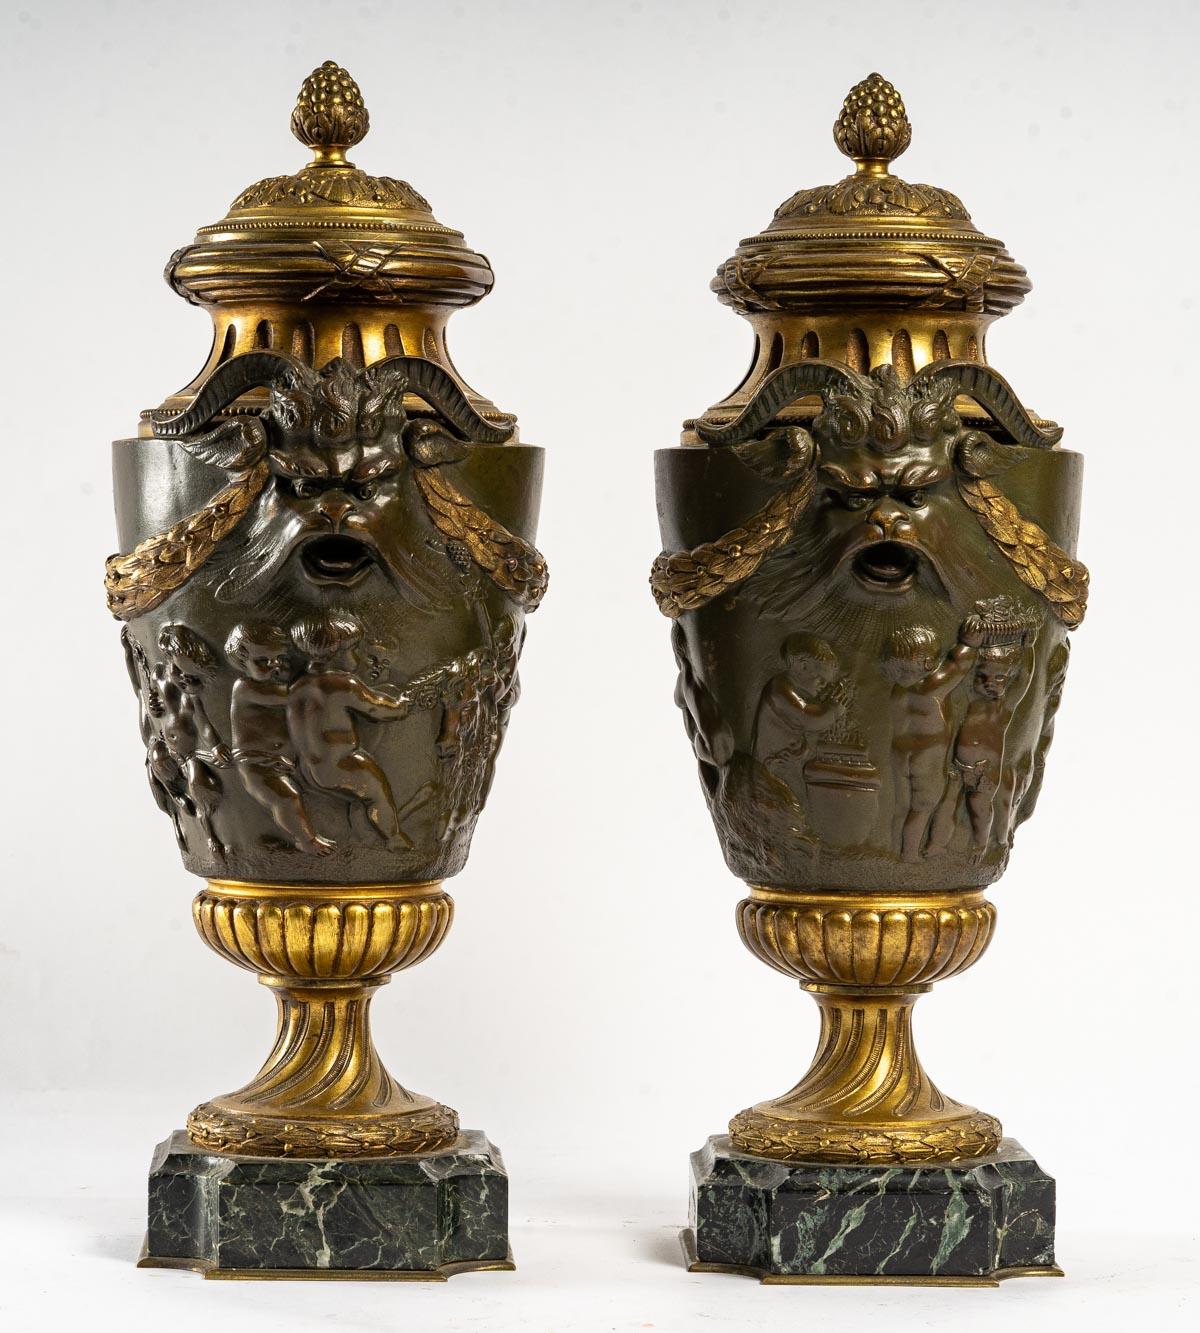 Pair of Patinated and Gilt Bronze Cassolettes, Marble Base, 19th century, Napoleon III period.
H: 42 cm, W: 19 cm, D: 15 cm